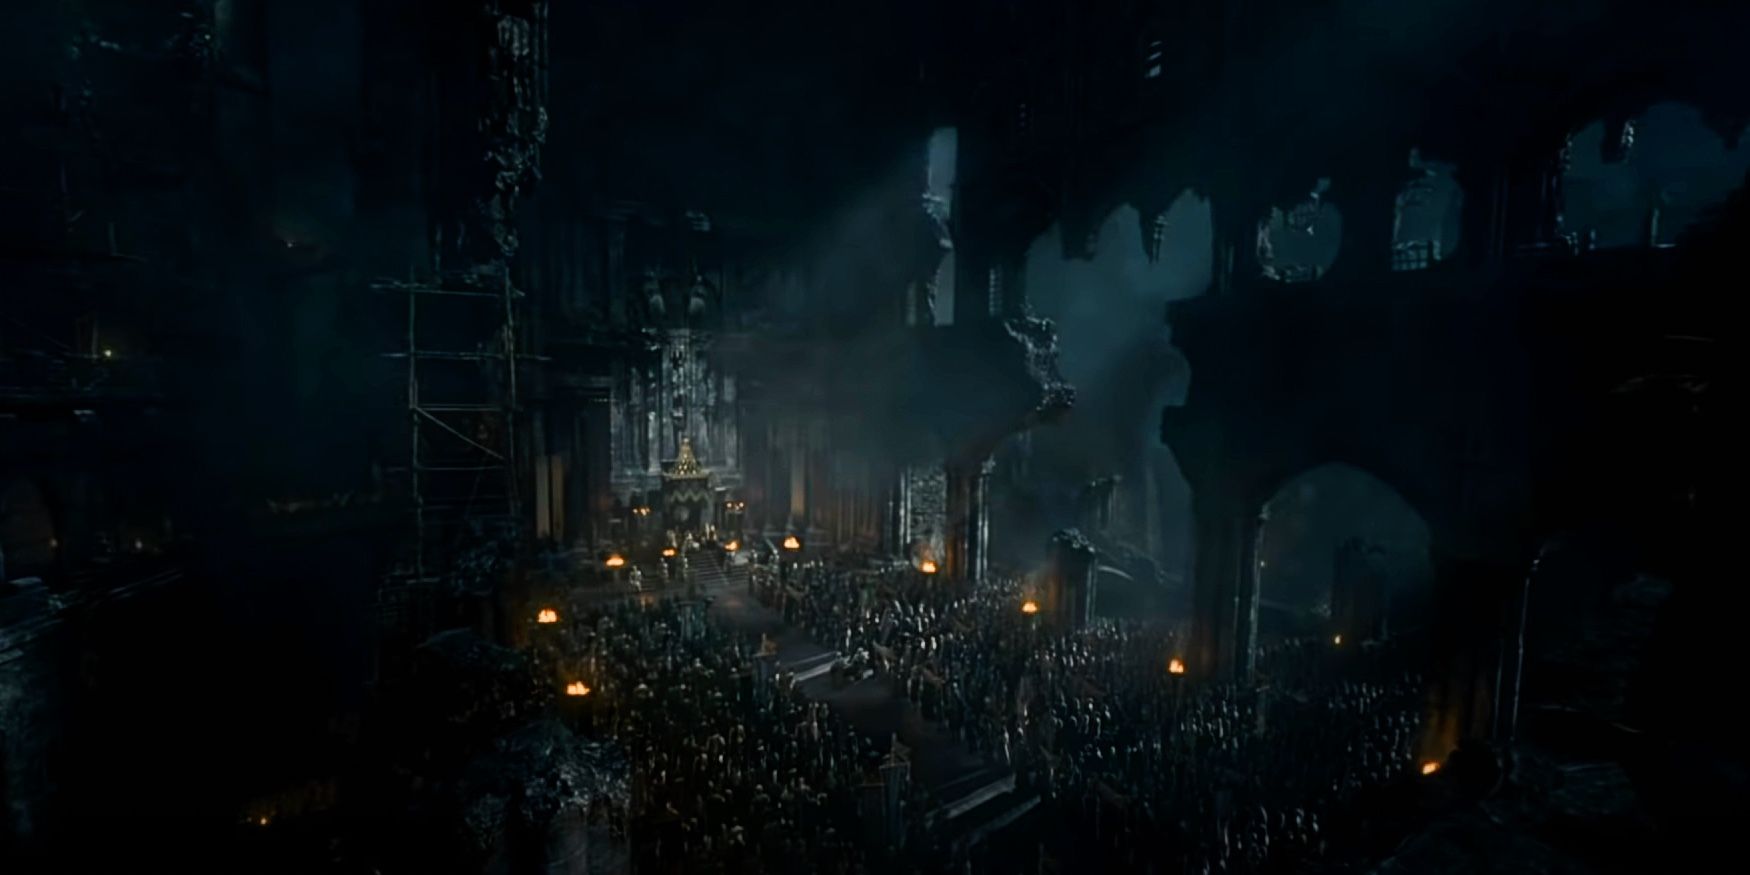 The Great hall of Harrenhal